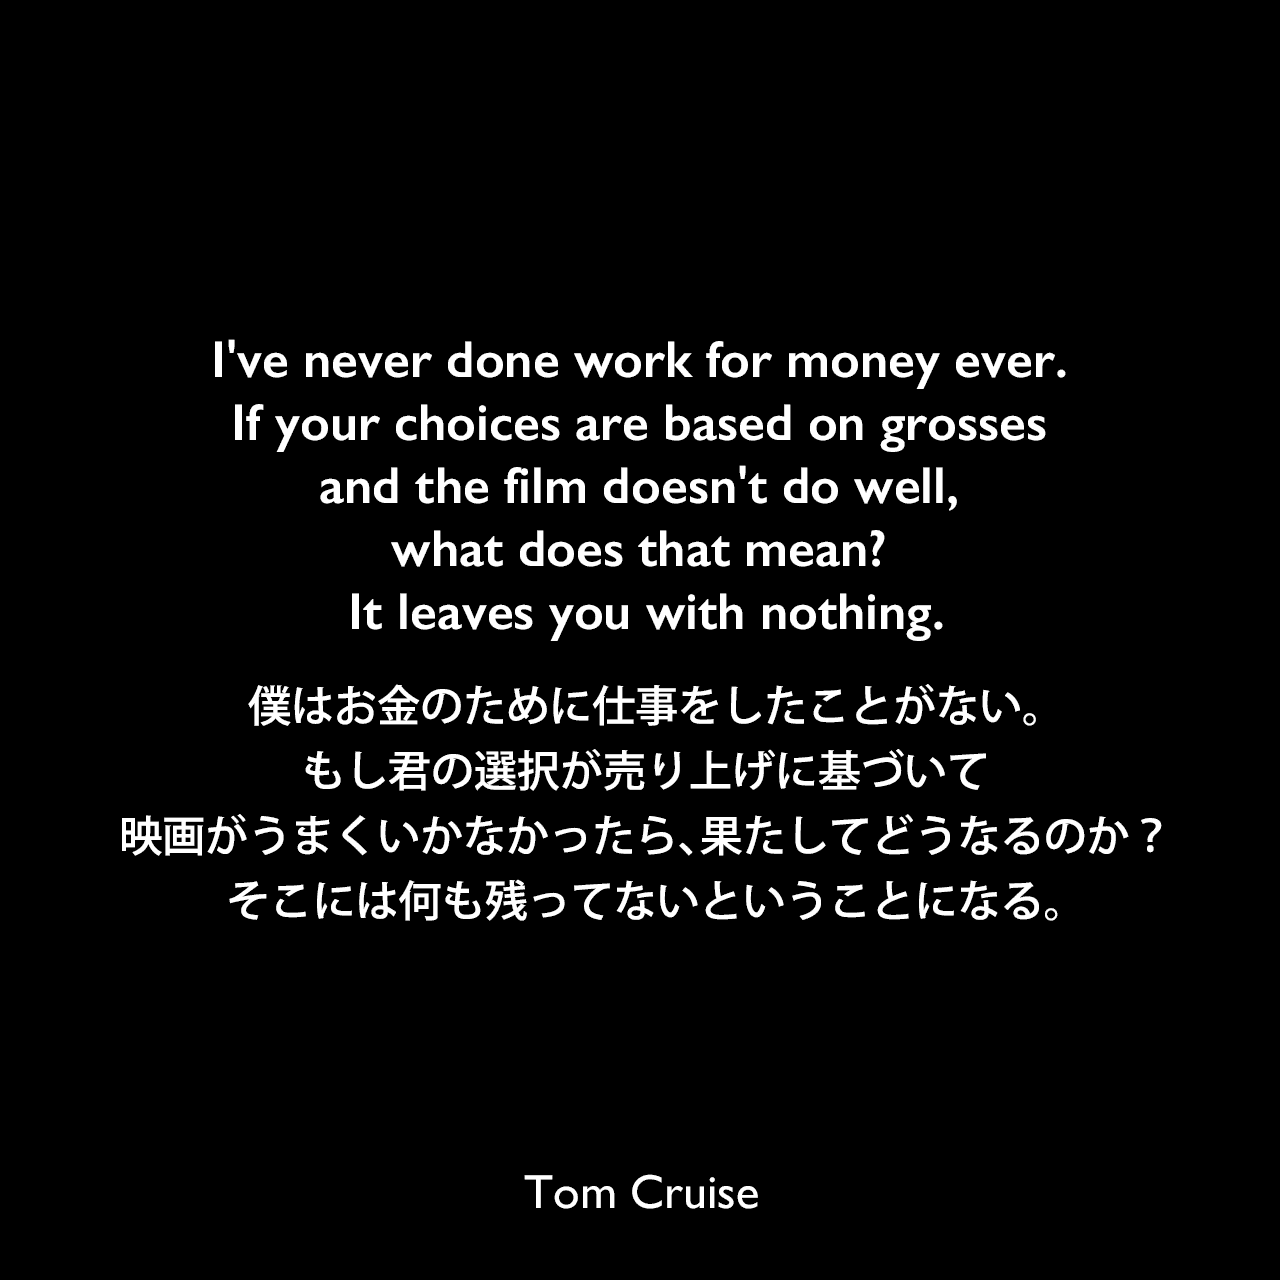 I've never done work for money ever. If your choices are based on grosses and the film doesn't do well, what does that mean? It leaves you with nothing.僕はお金のために仕事をしたことがない。もし君の選択が売り上げに基づいて、映画がうまくいかなかったら、果たしてどうなるのか？そこには何も残ってないということになる。Tom Cruise